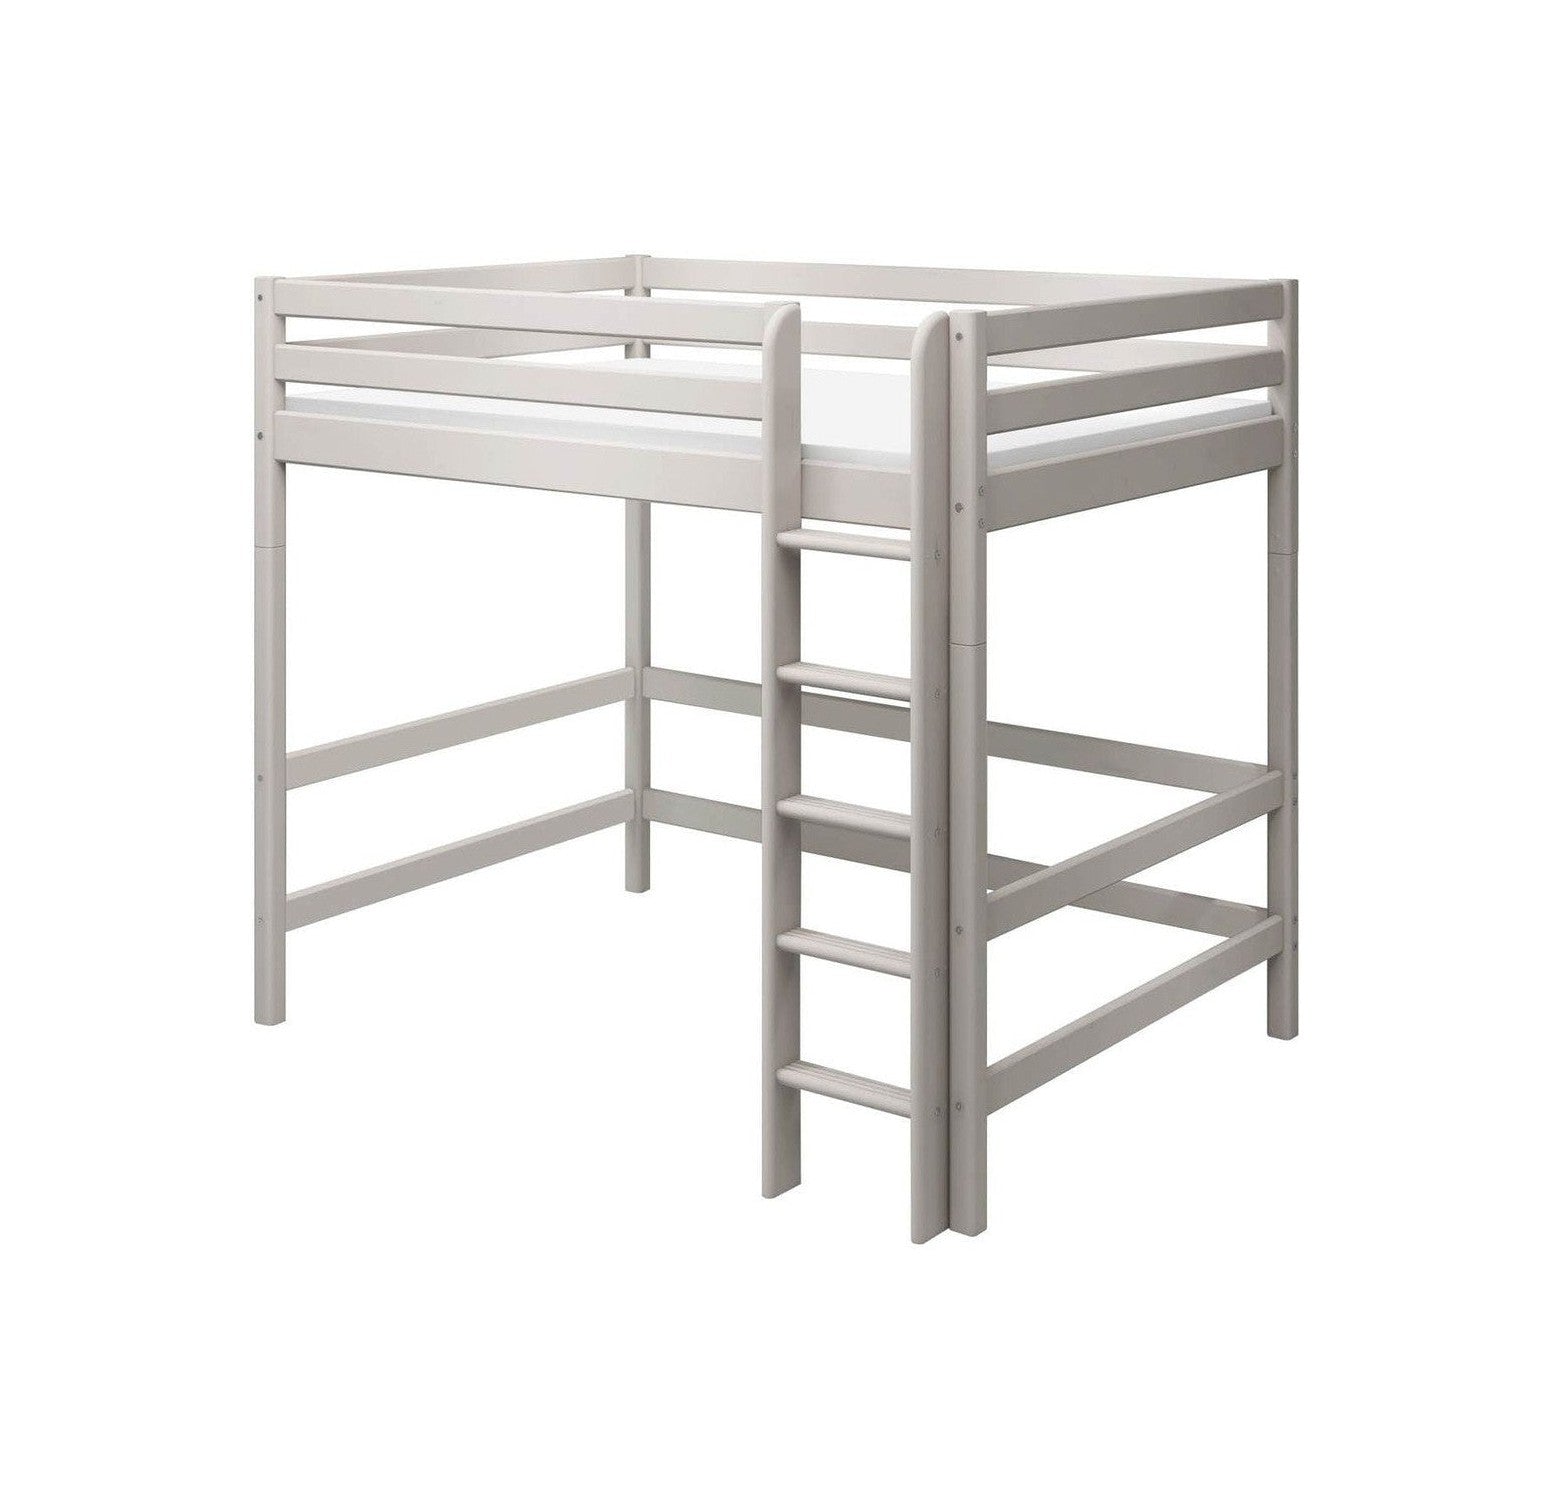 FLEXA High bed with straight ladder